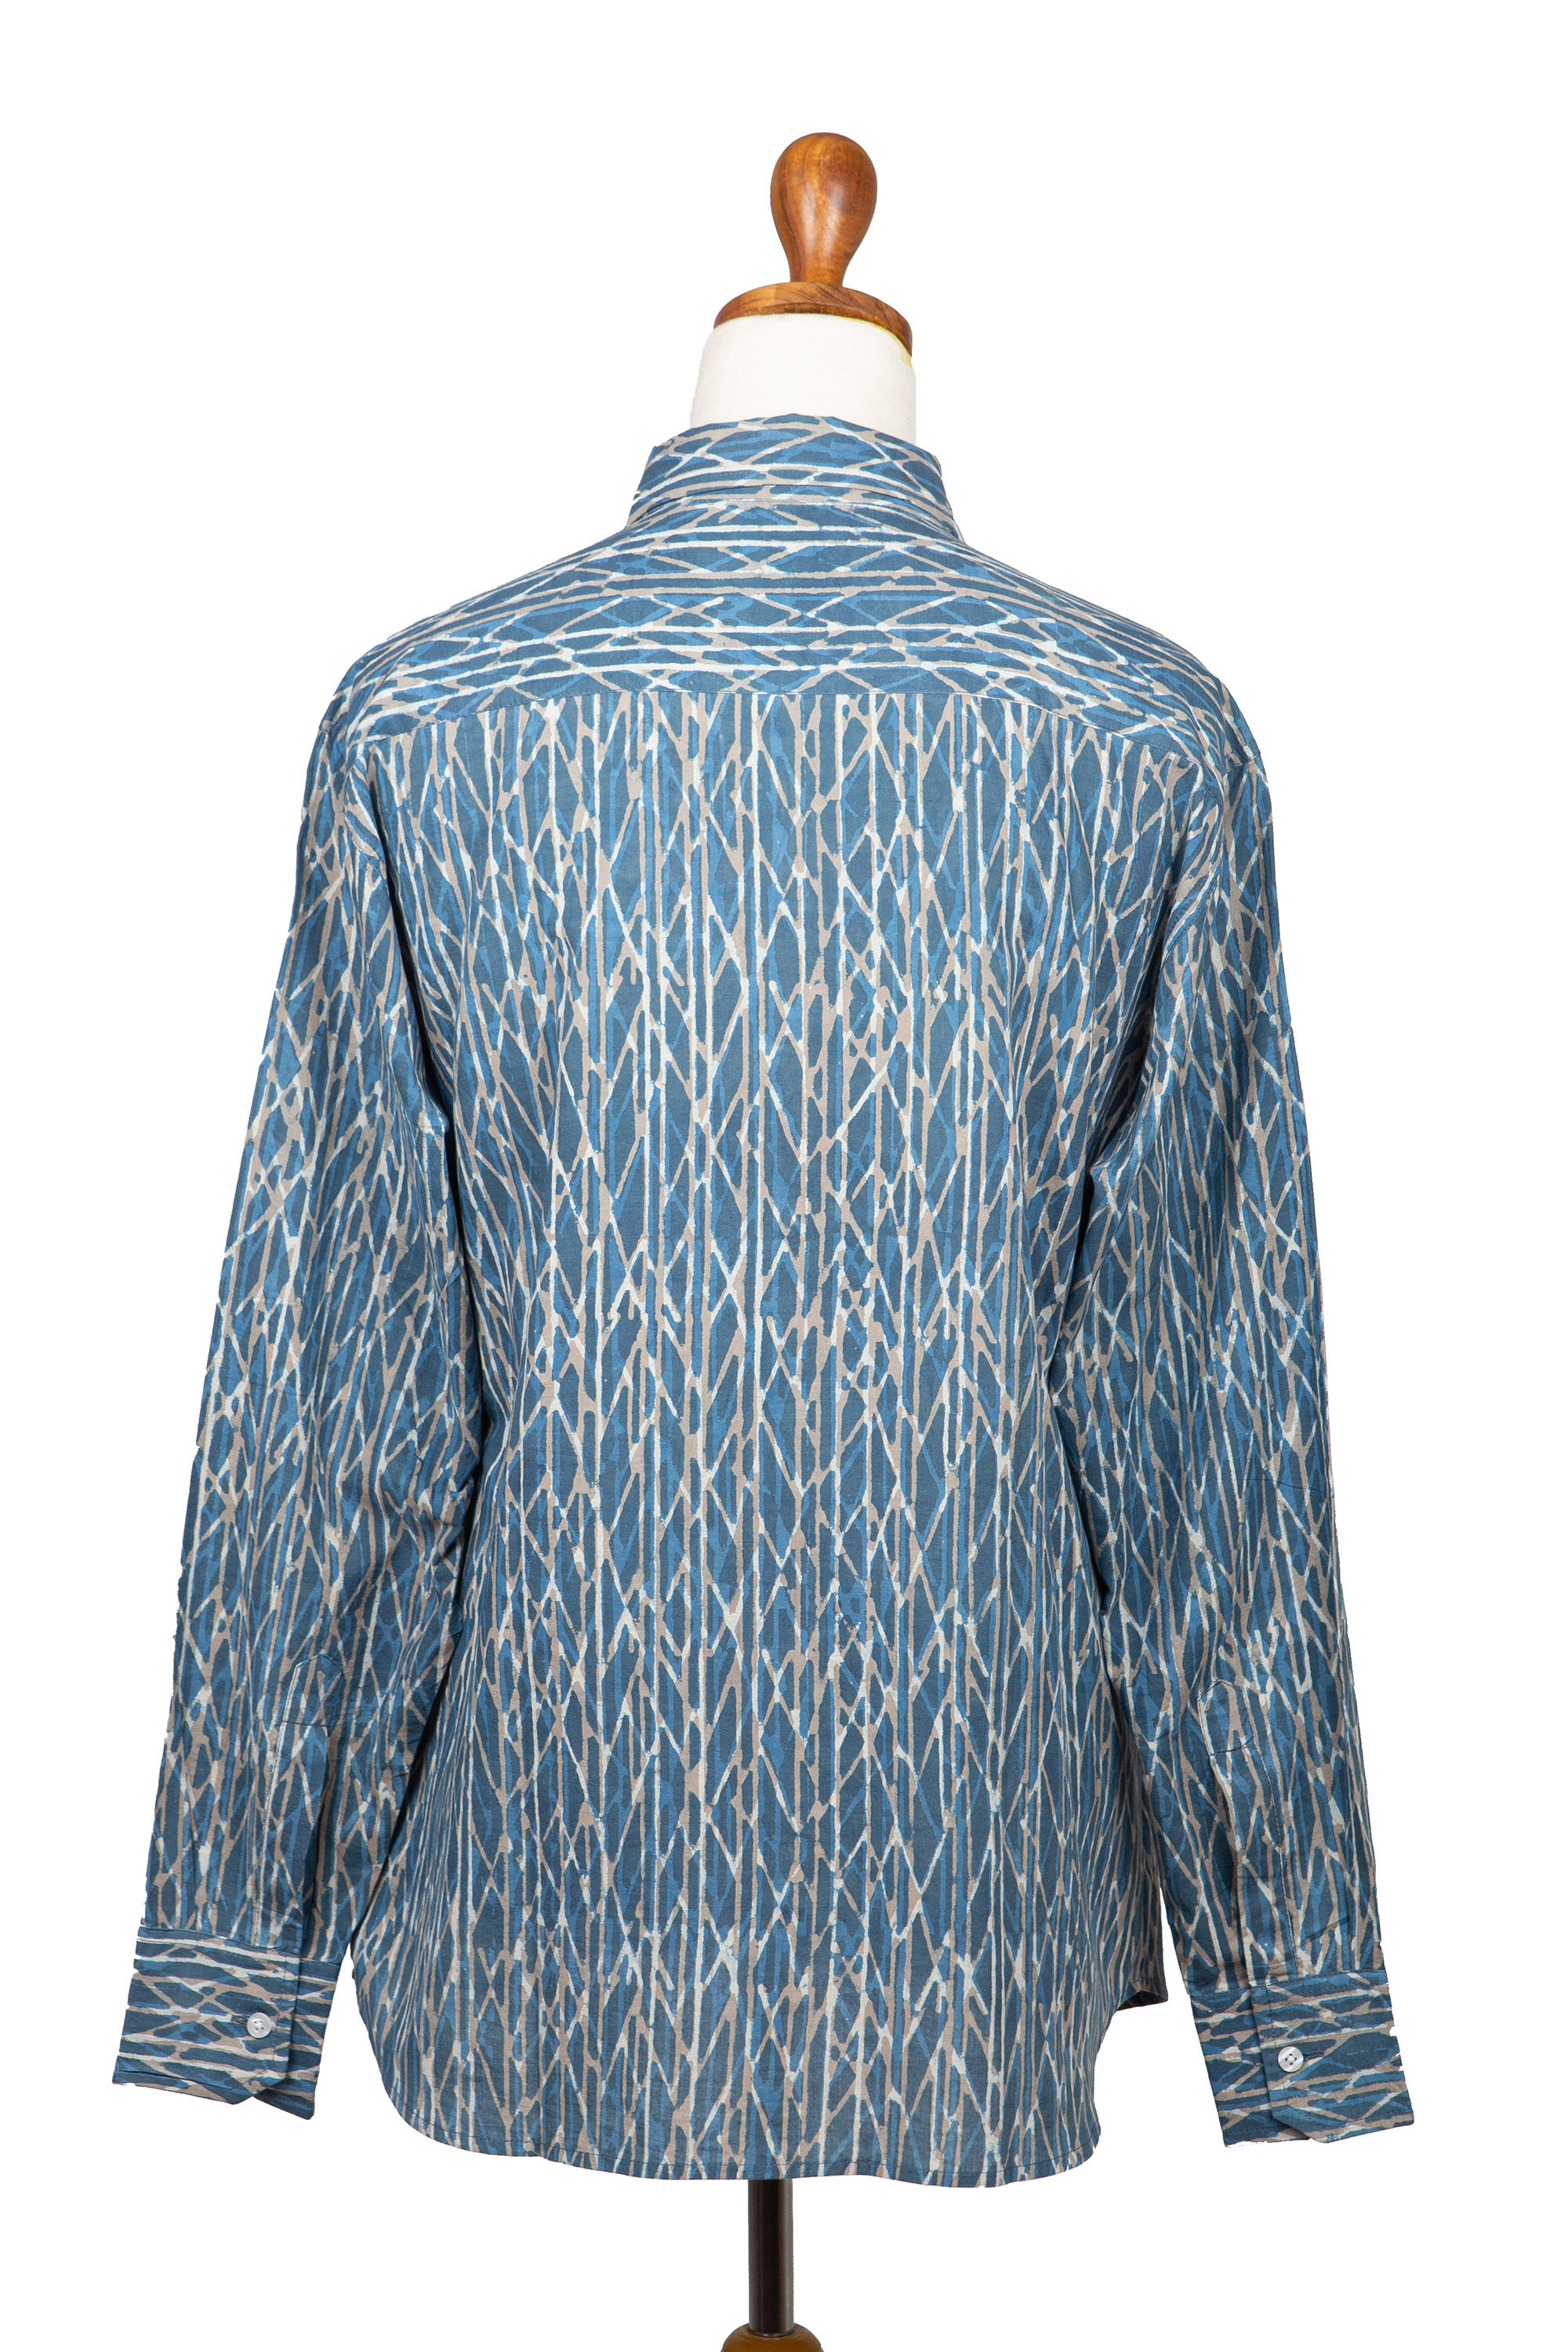 Men's Long-Sleeve Block-Printed Shirt from India - Traditional Elegance ...